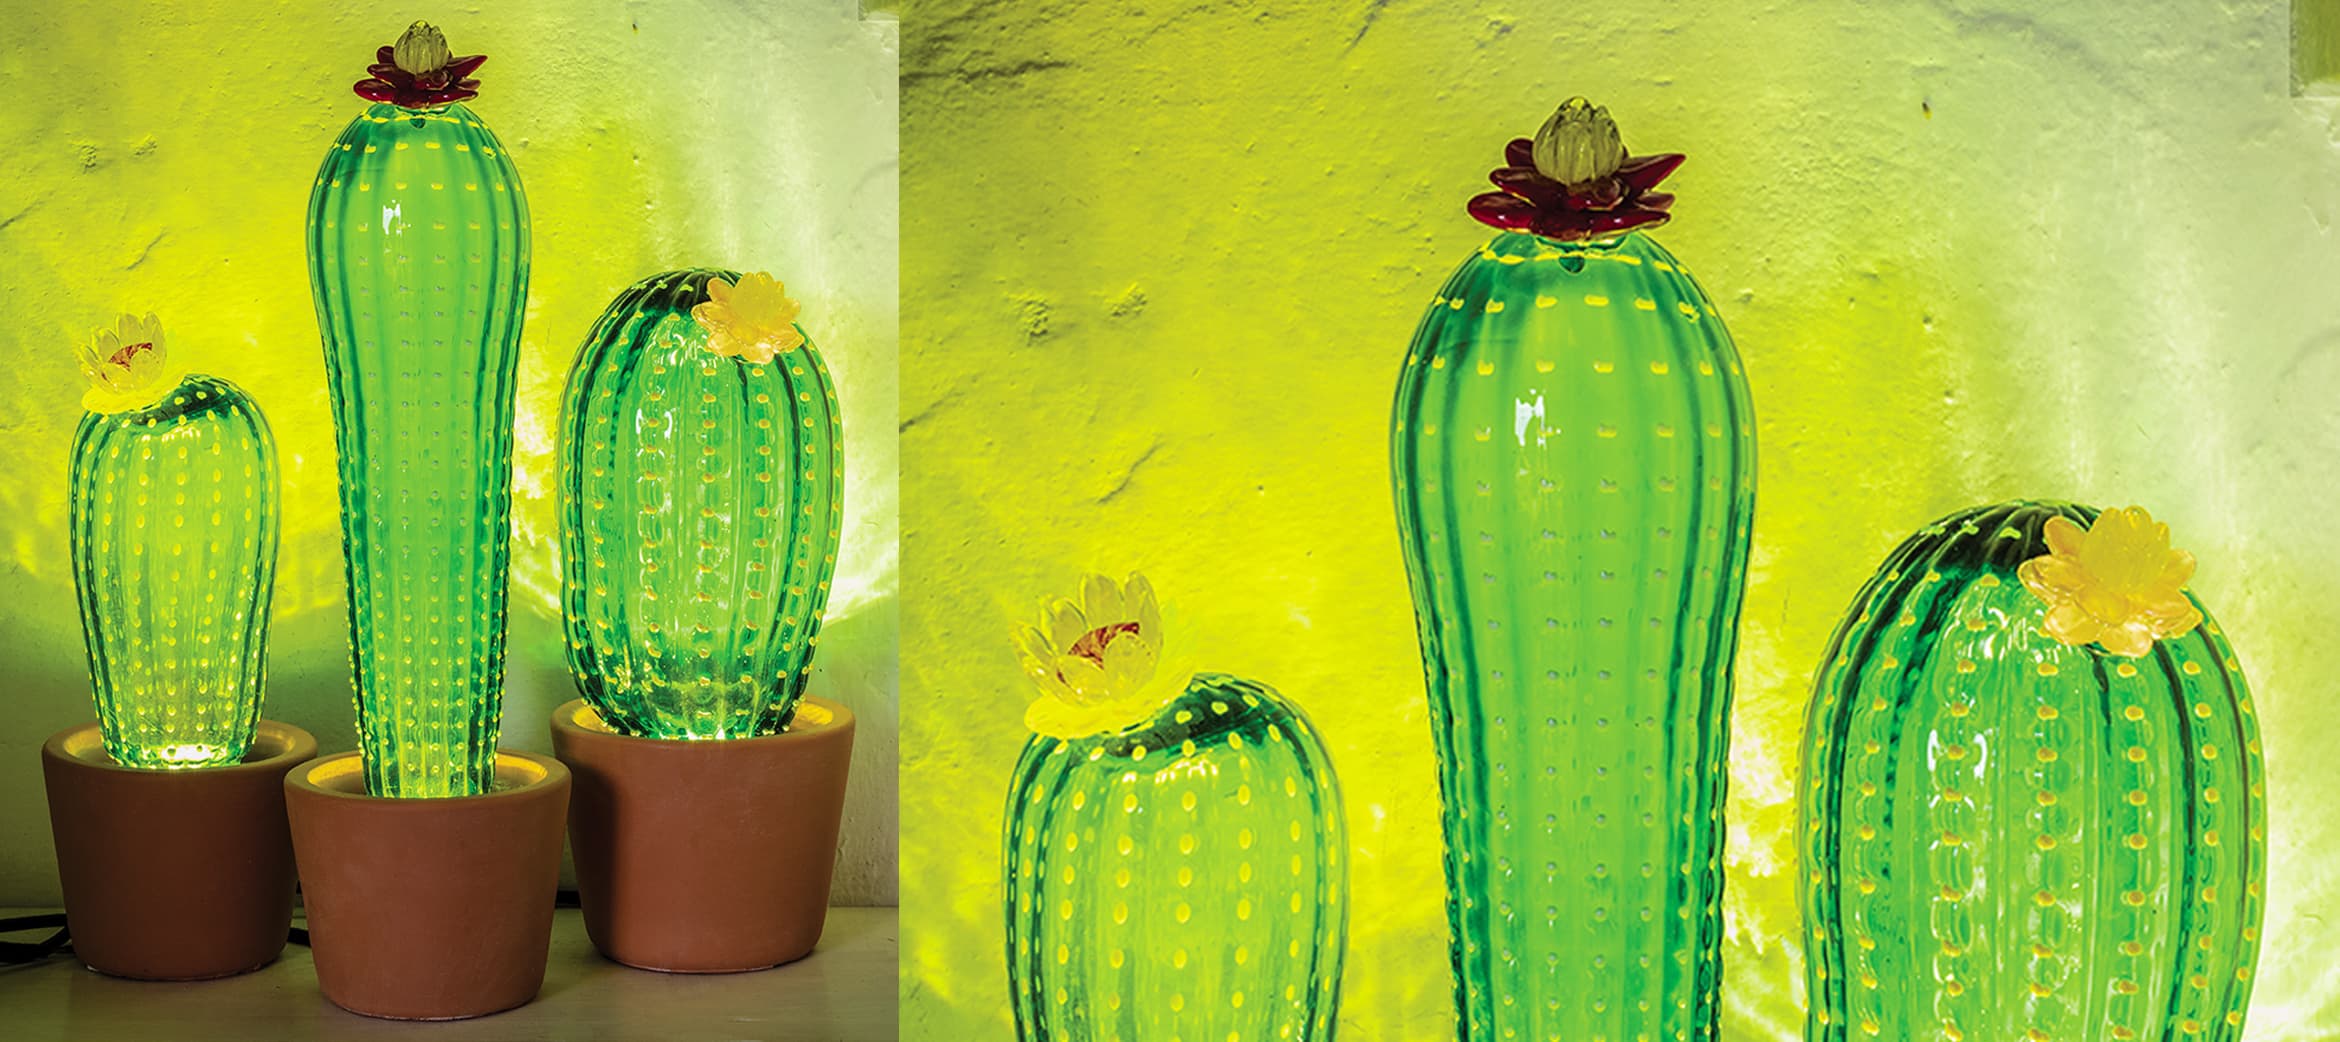 cactus_productpage